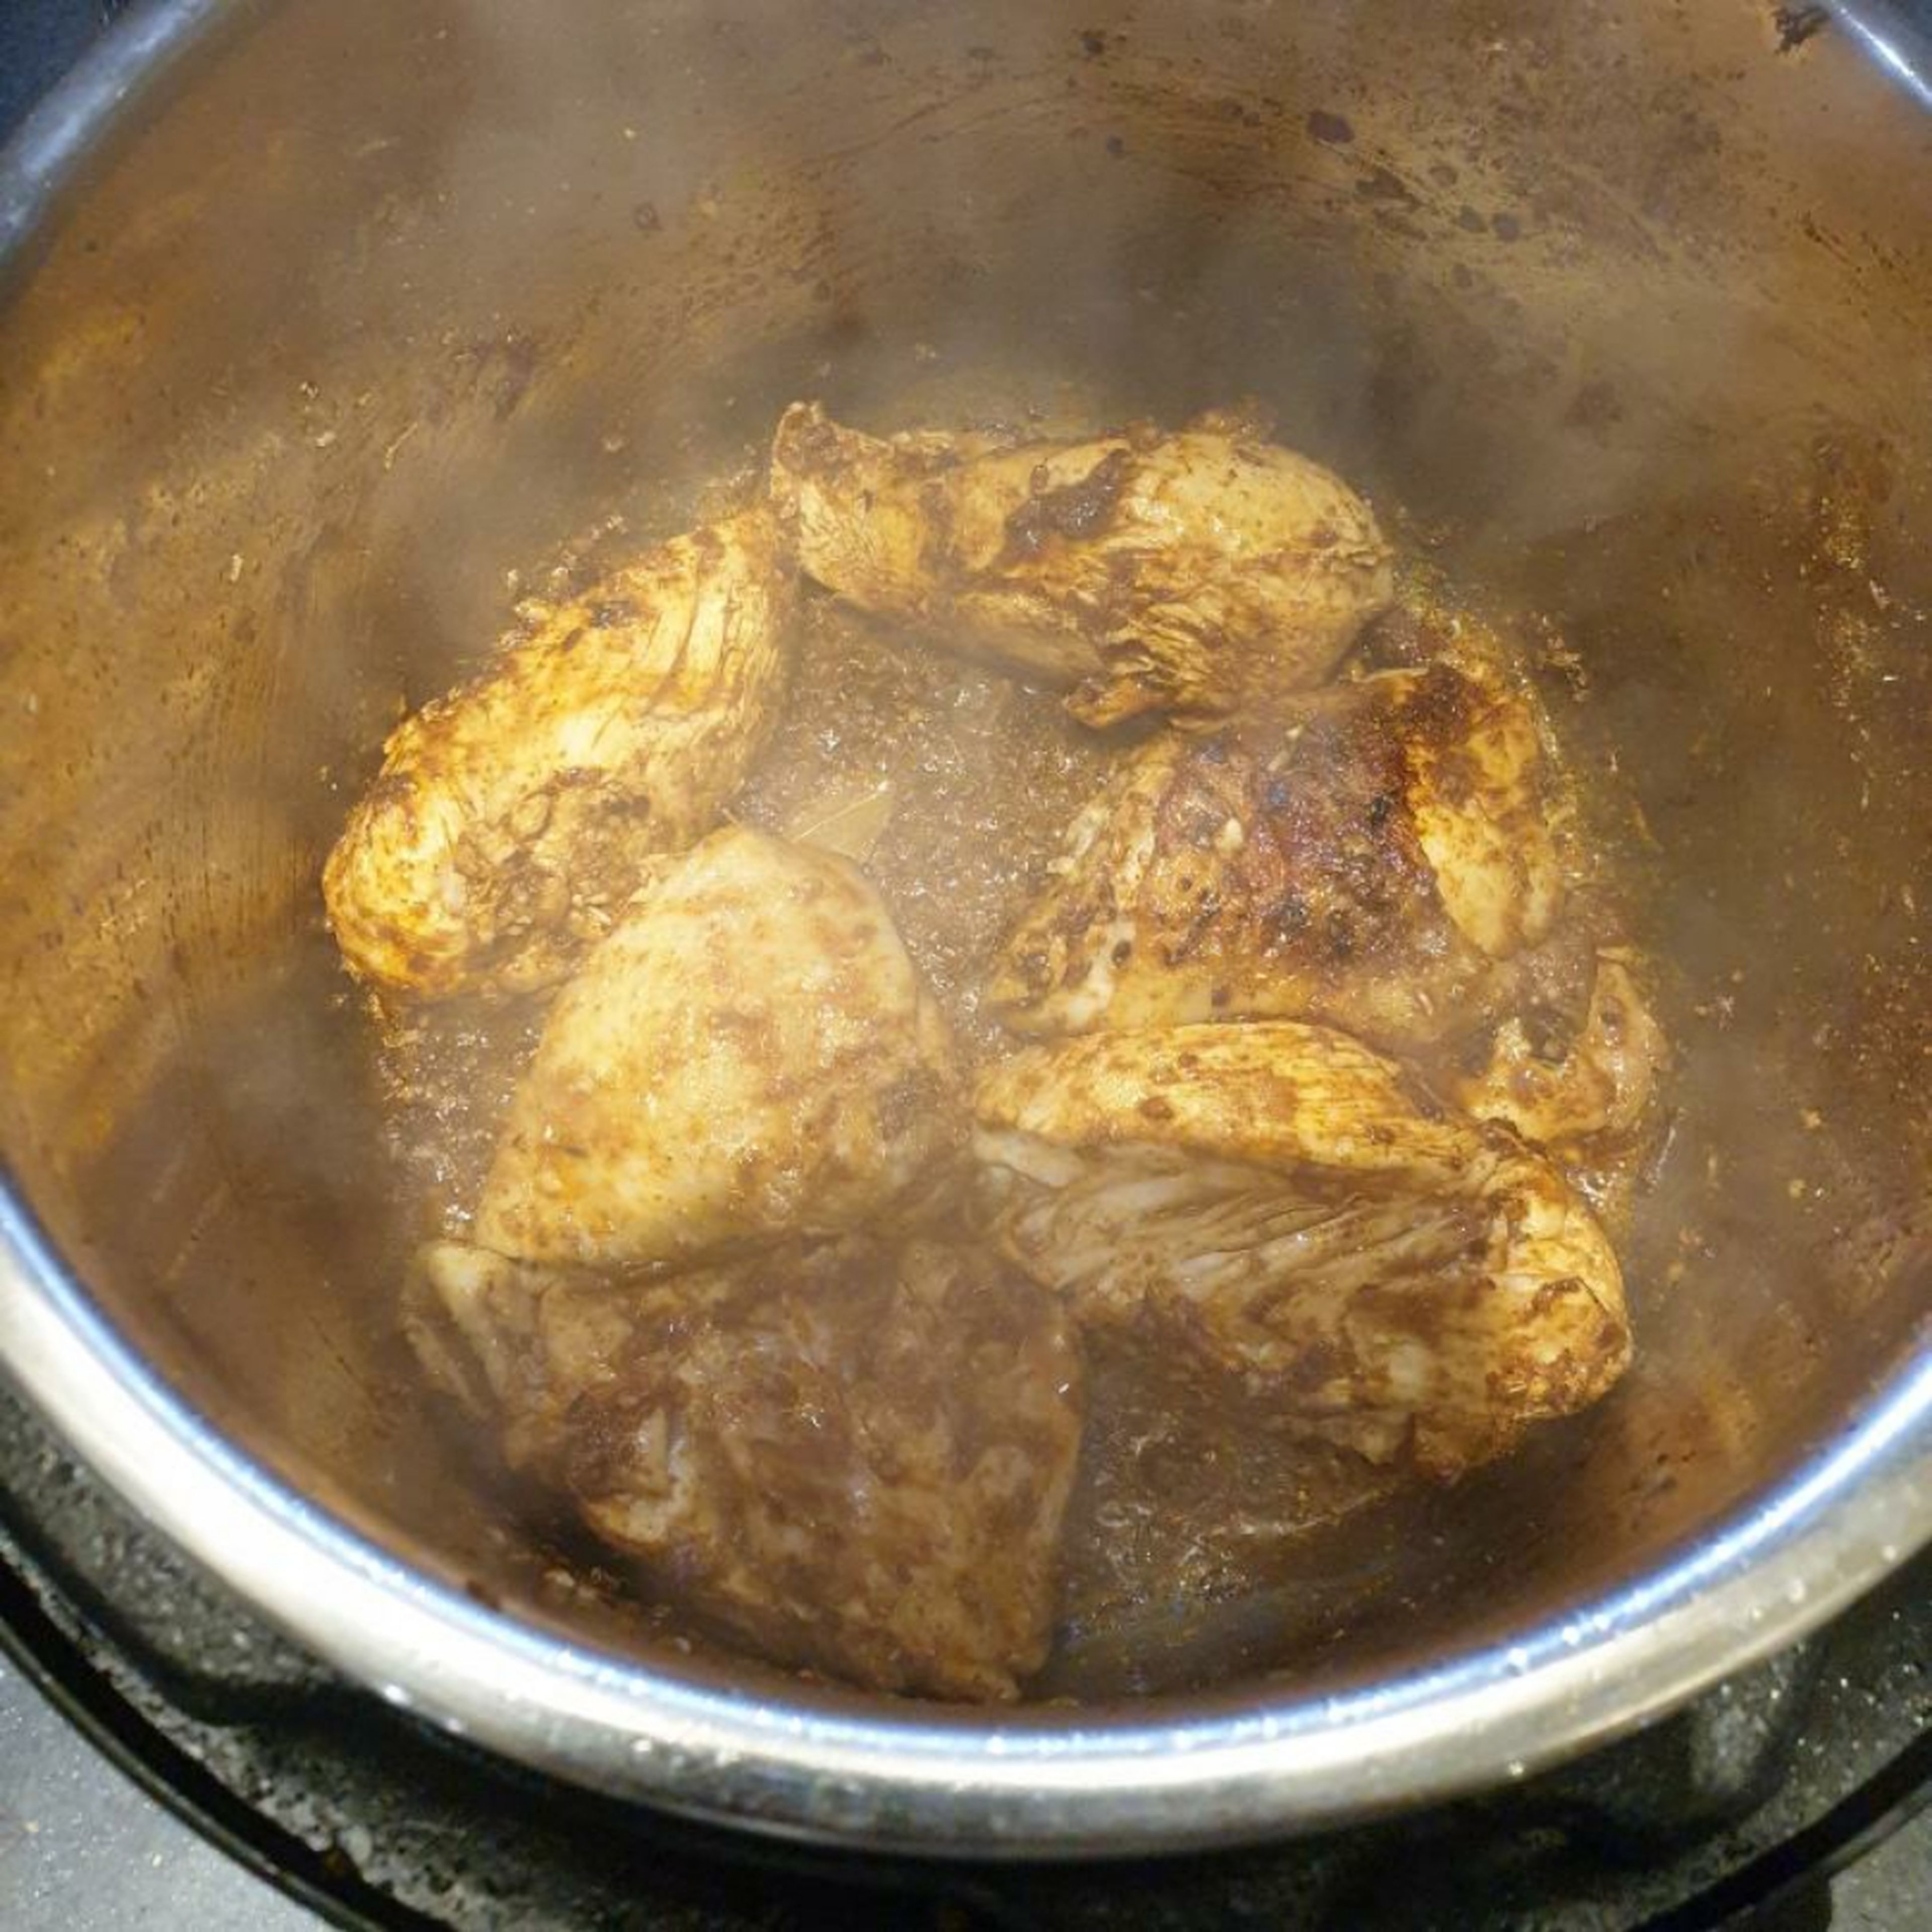 Add the ground spices and mix to coat the chicken.